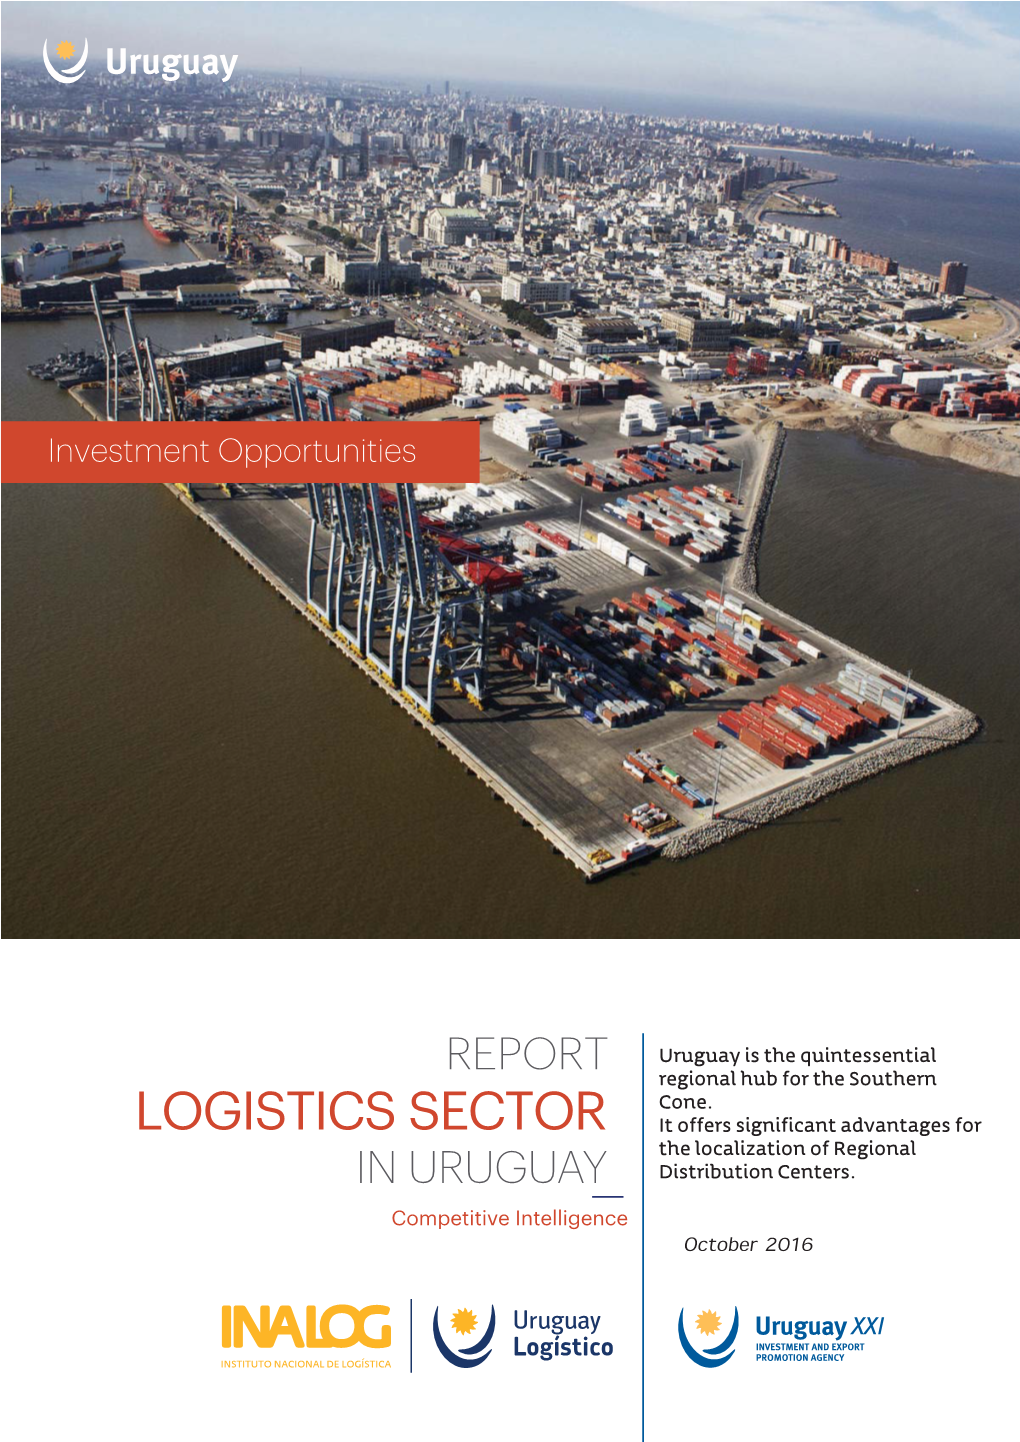 LOGISTICS SECTOR It Offers Significant Advantages for the Localization of Regional in URUGUAY Distribution Centers